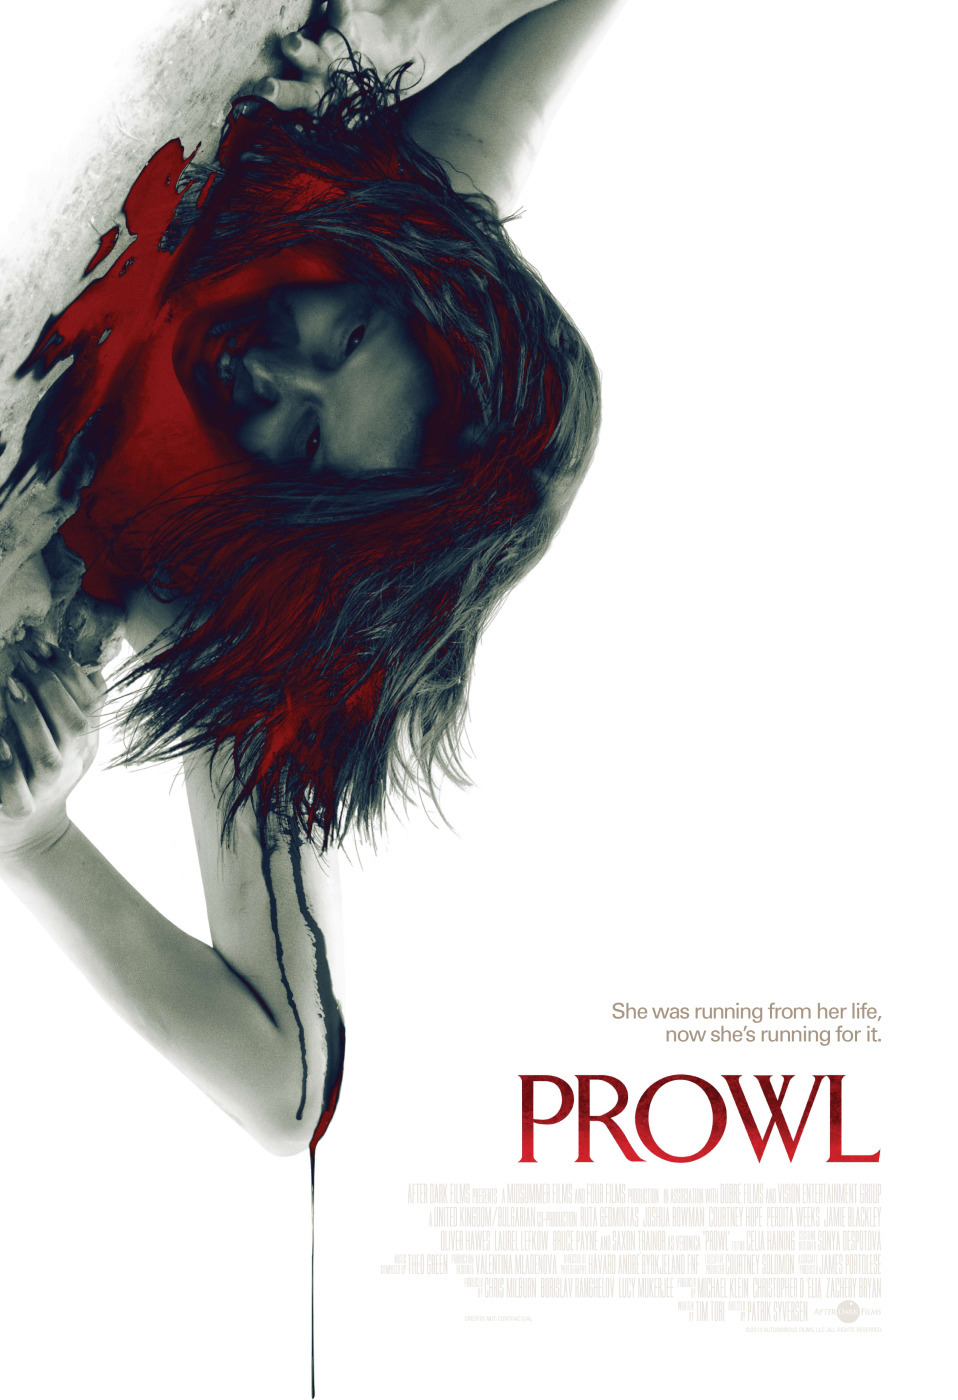 Prowl movies in USA